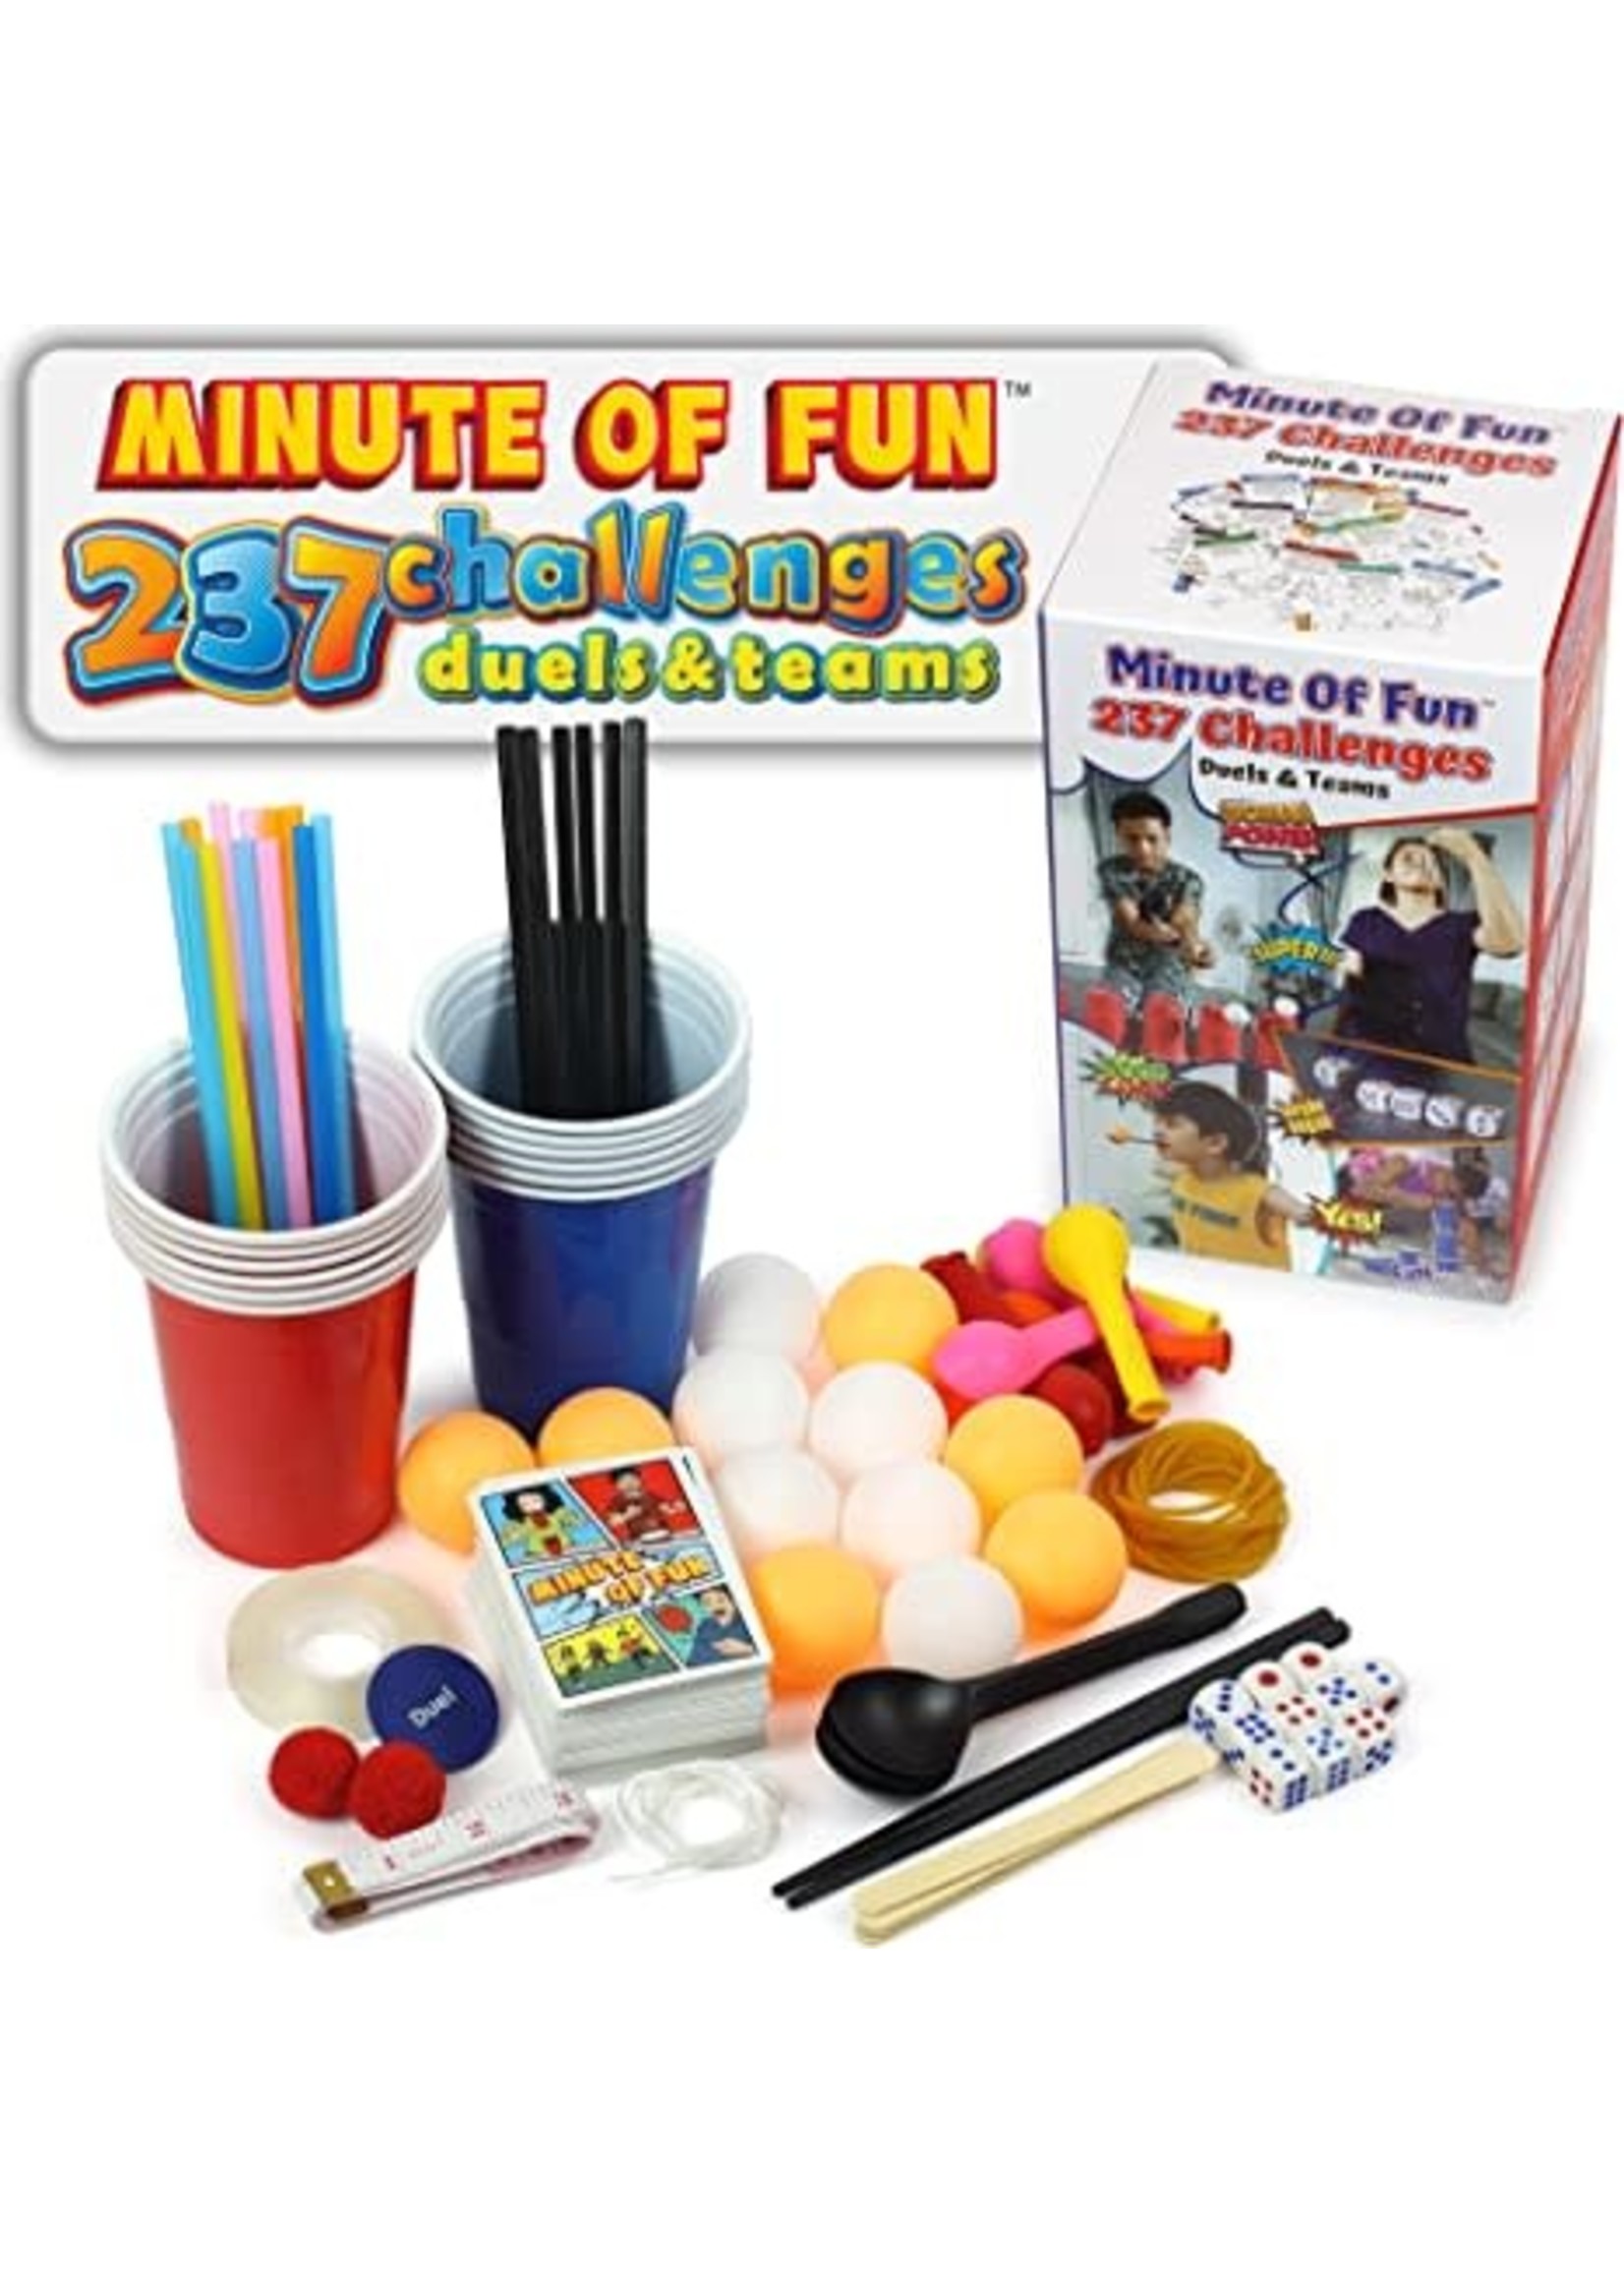 MINUTE OF FUN PARTY GAME